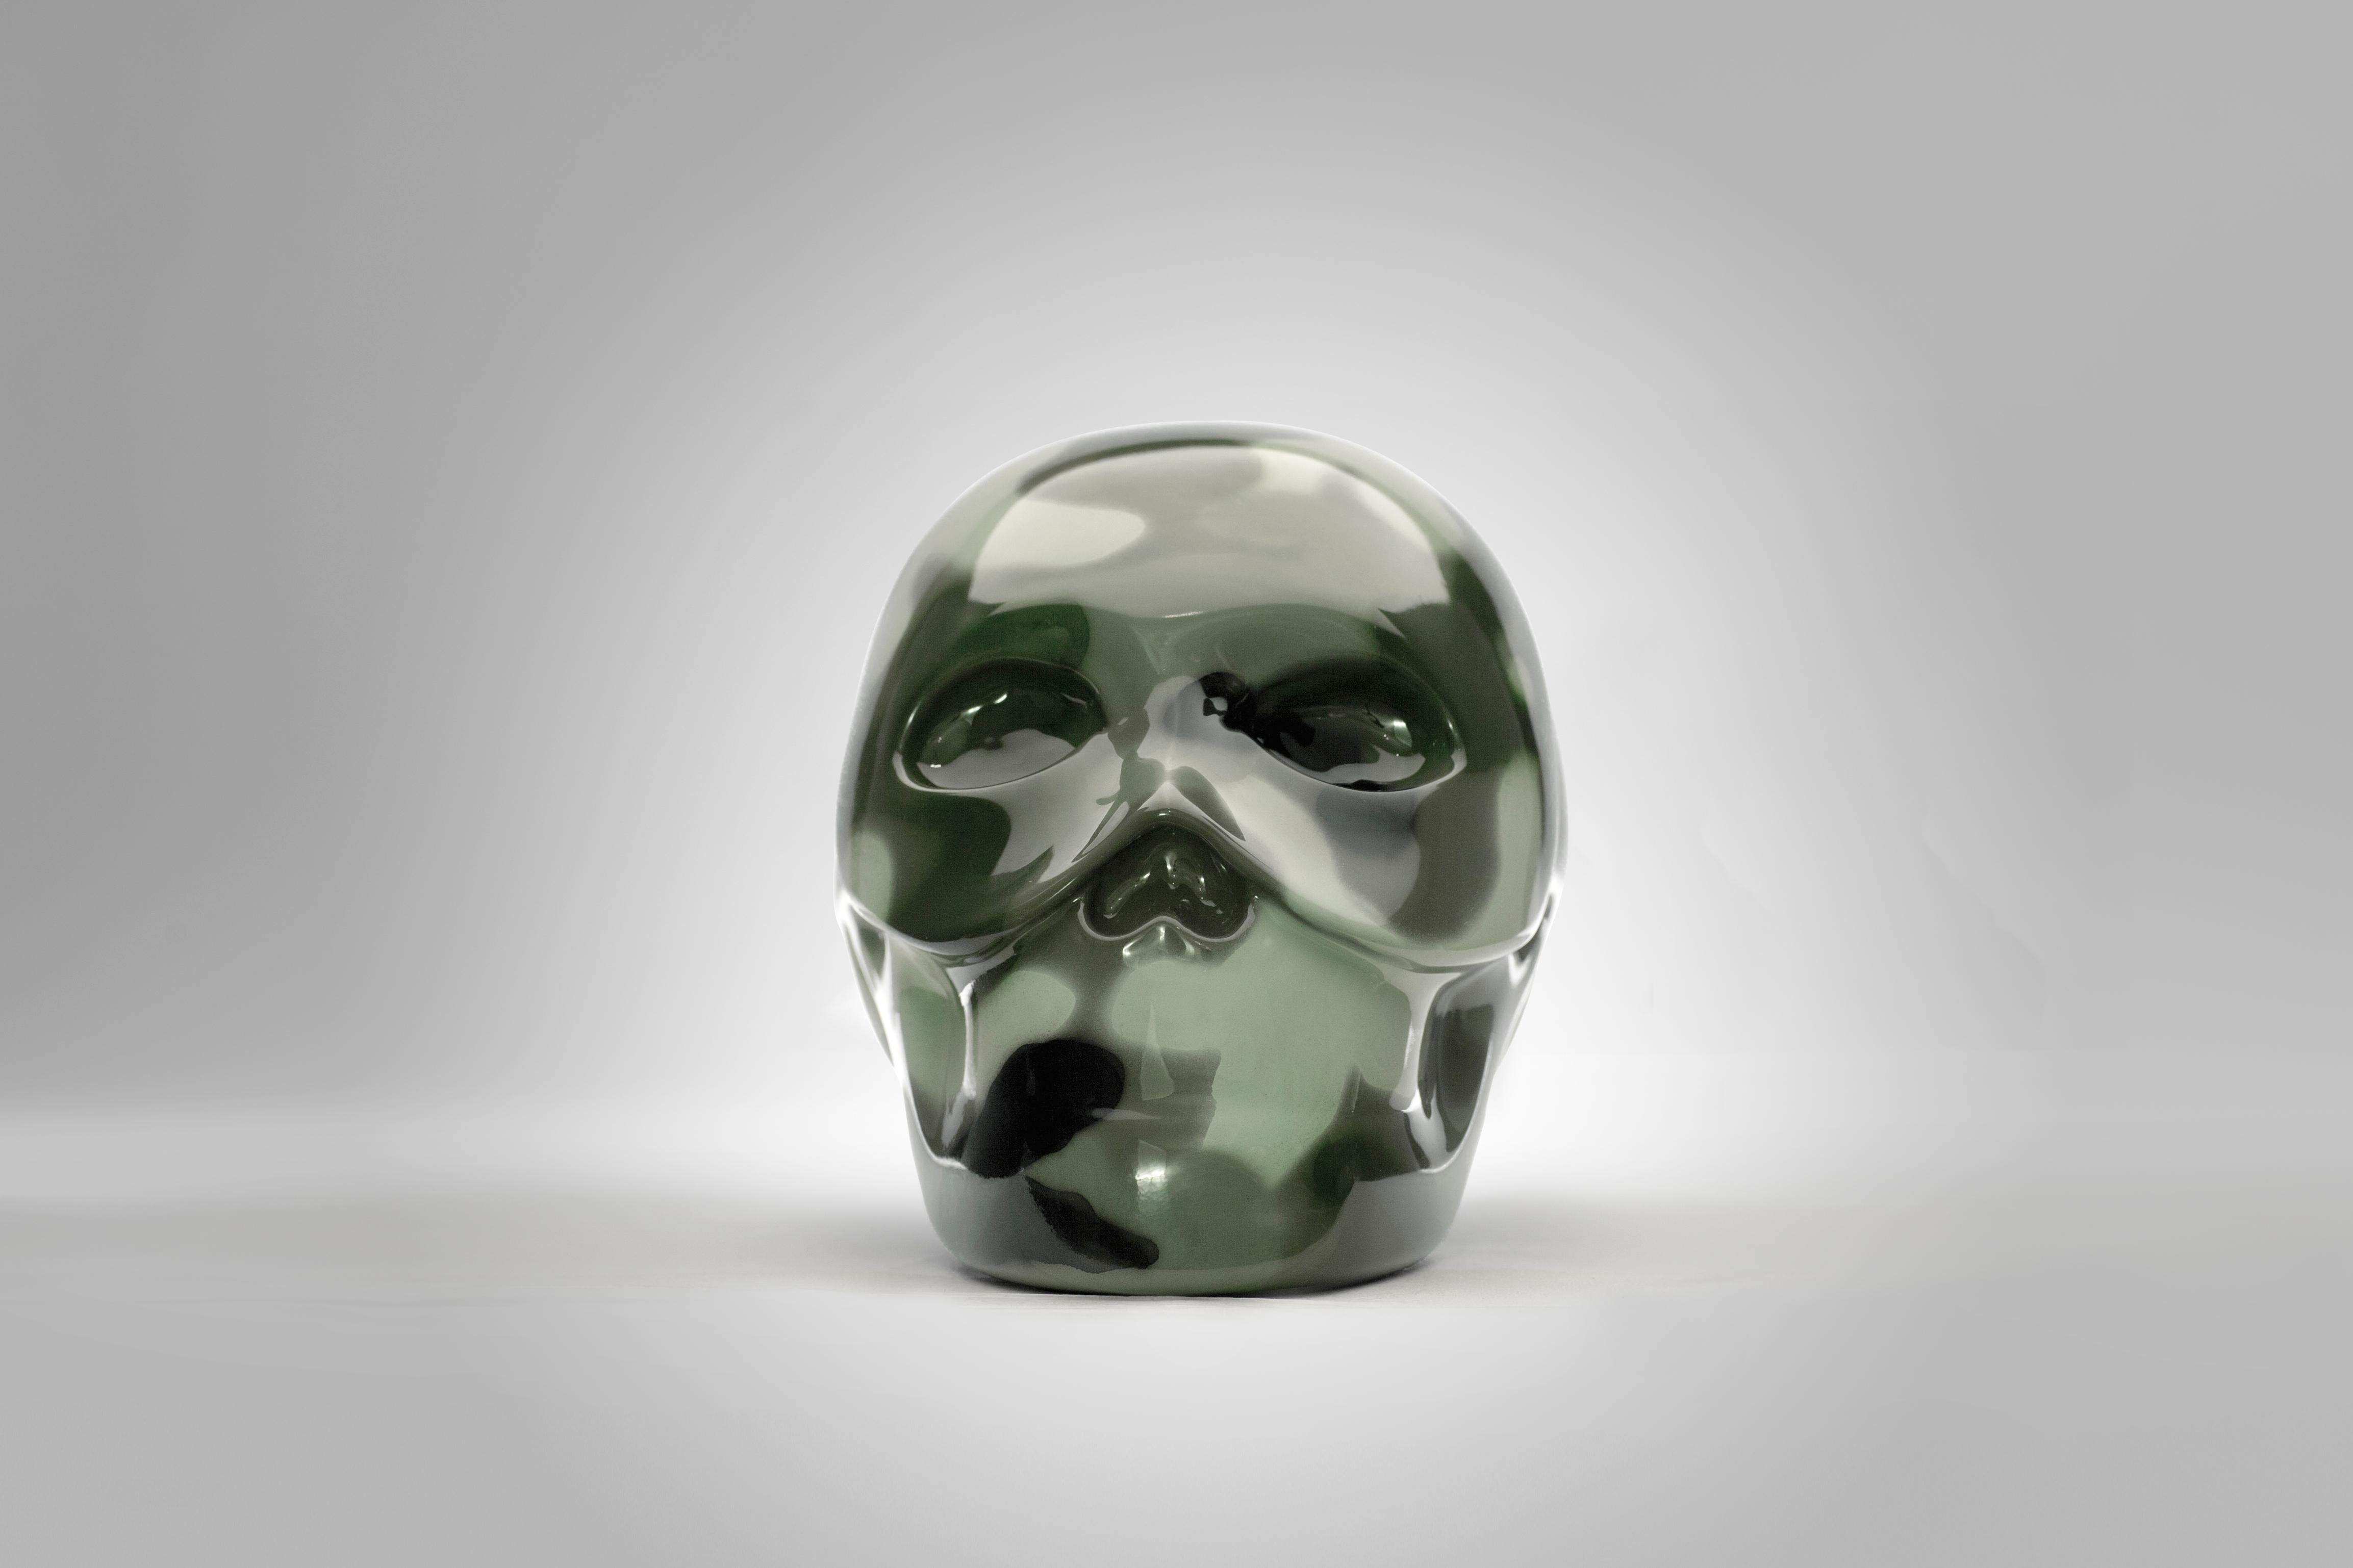 - THE SKULL - REBEL WITHOUT A REASON
_______________________________________________
Hand-crafted from bi-component resin by italian craftsmen.
Dimensions: 9x14x10 (w,d,h)

The decoration on the object is a contemporary reinterpretation of a classic